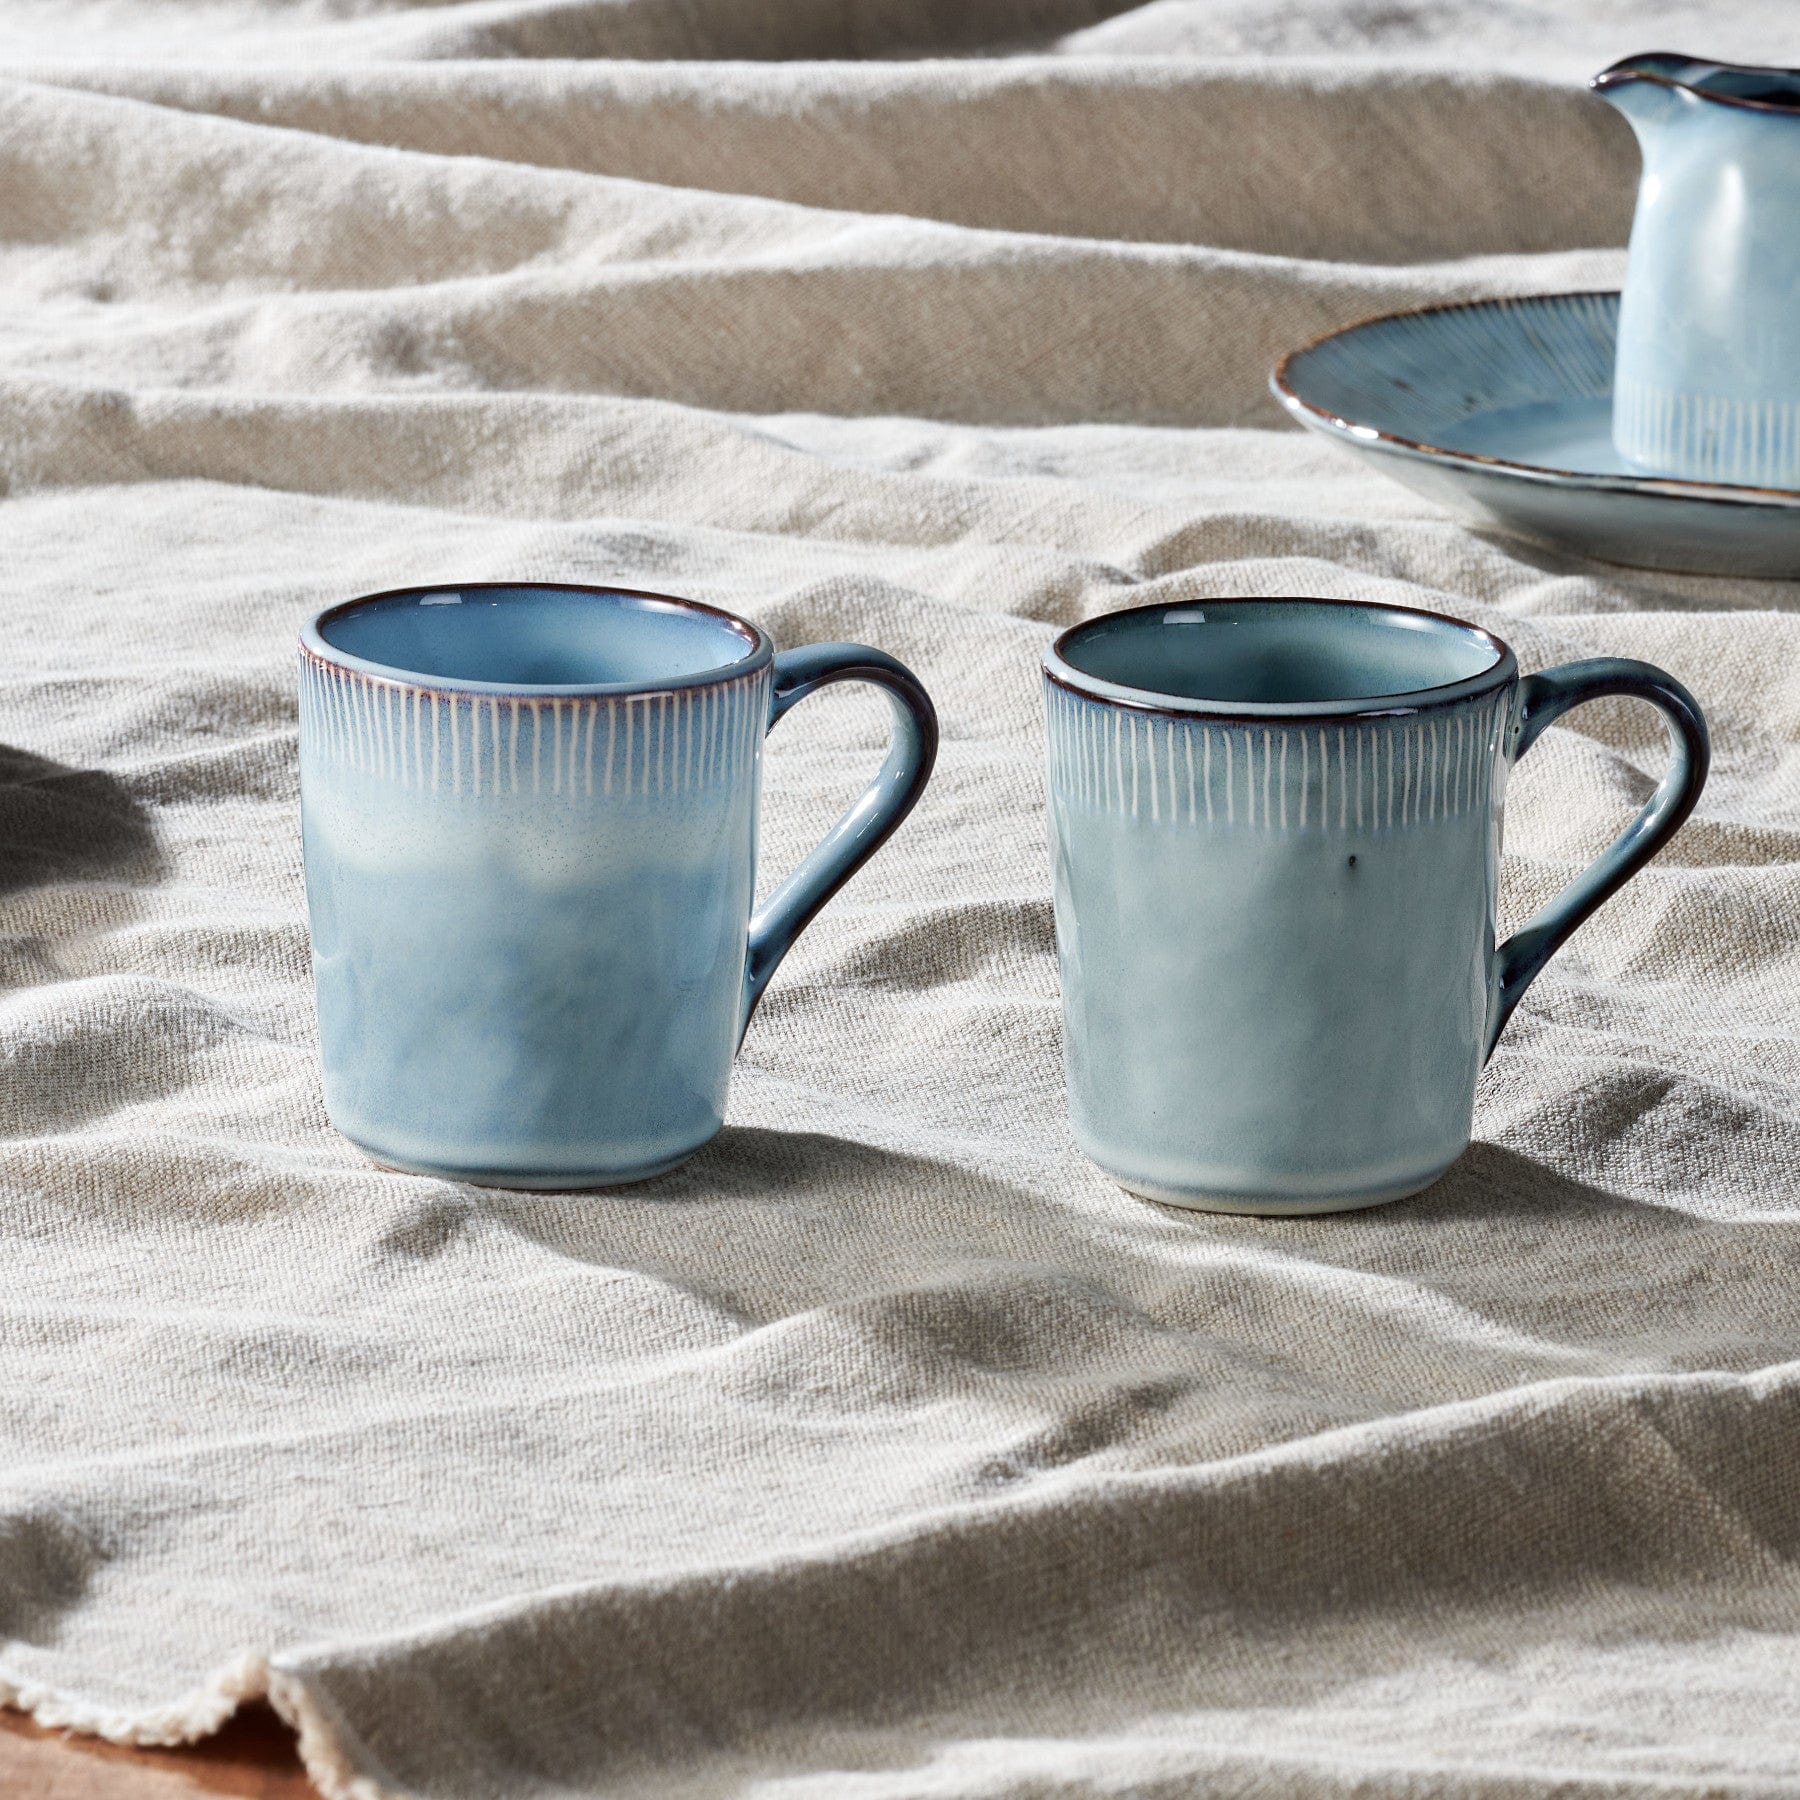 Two blue ceramic coffee mugs on beige linen tablecloth with sunlight casting soft shadows, artisan pottery, cozy home breakfast table setting, handmade stoneware cups with unique glaze texture.